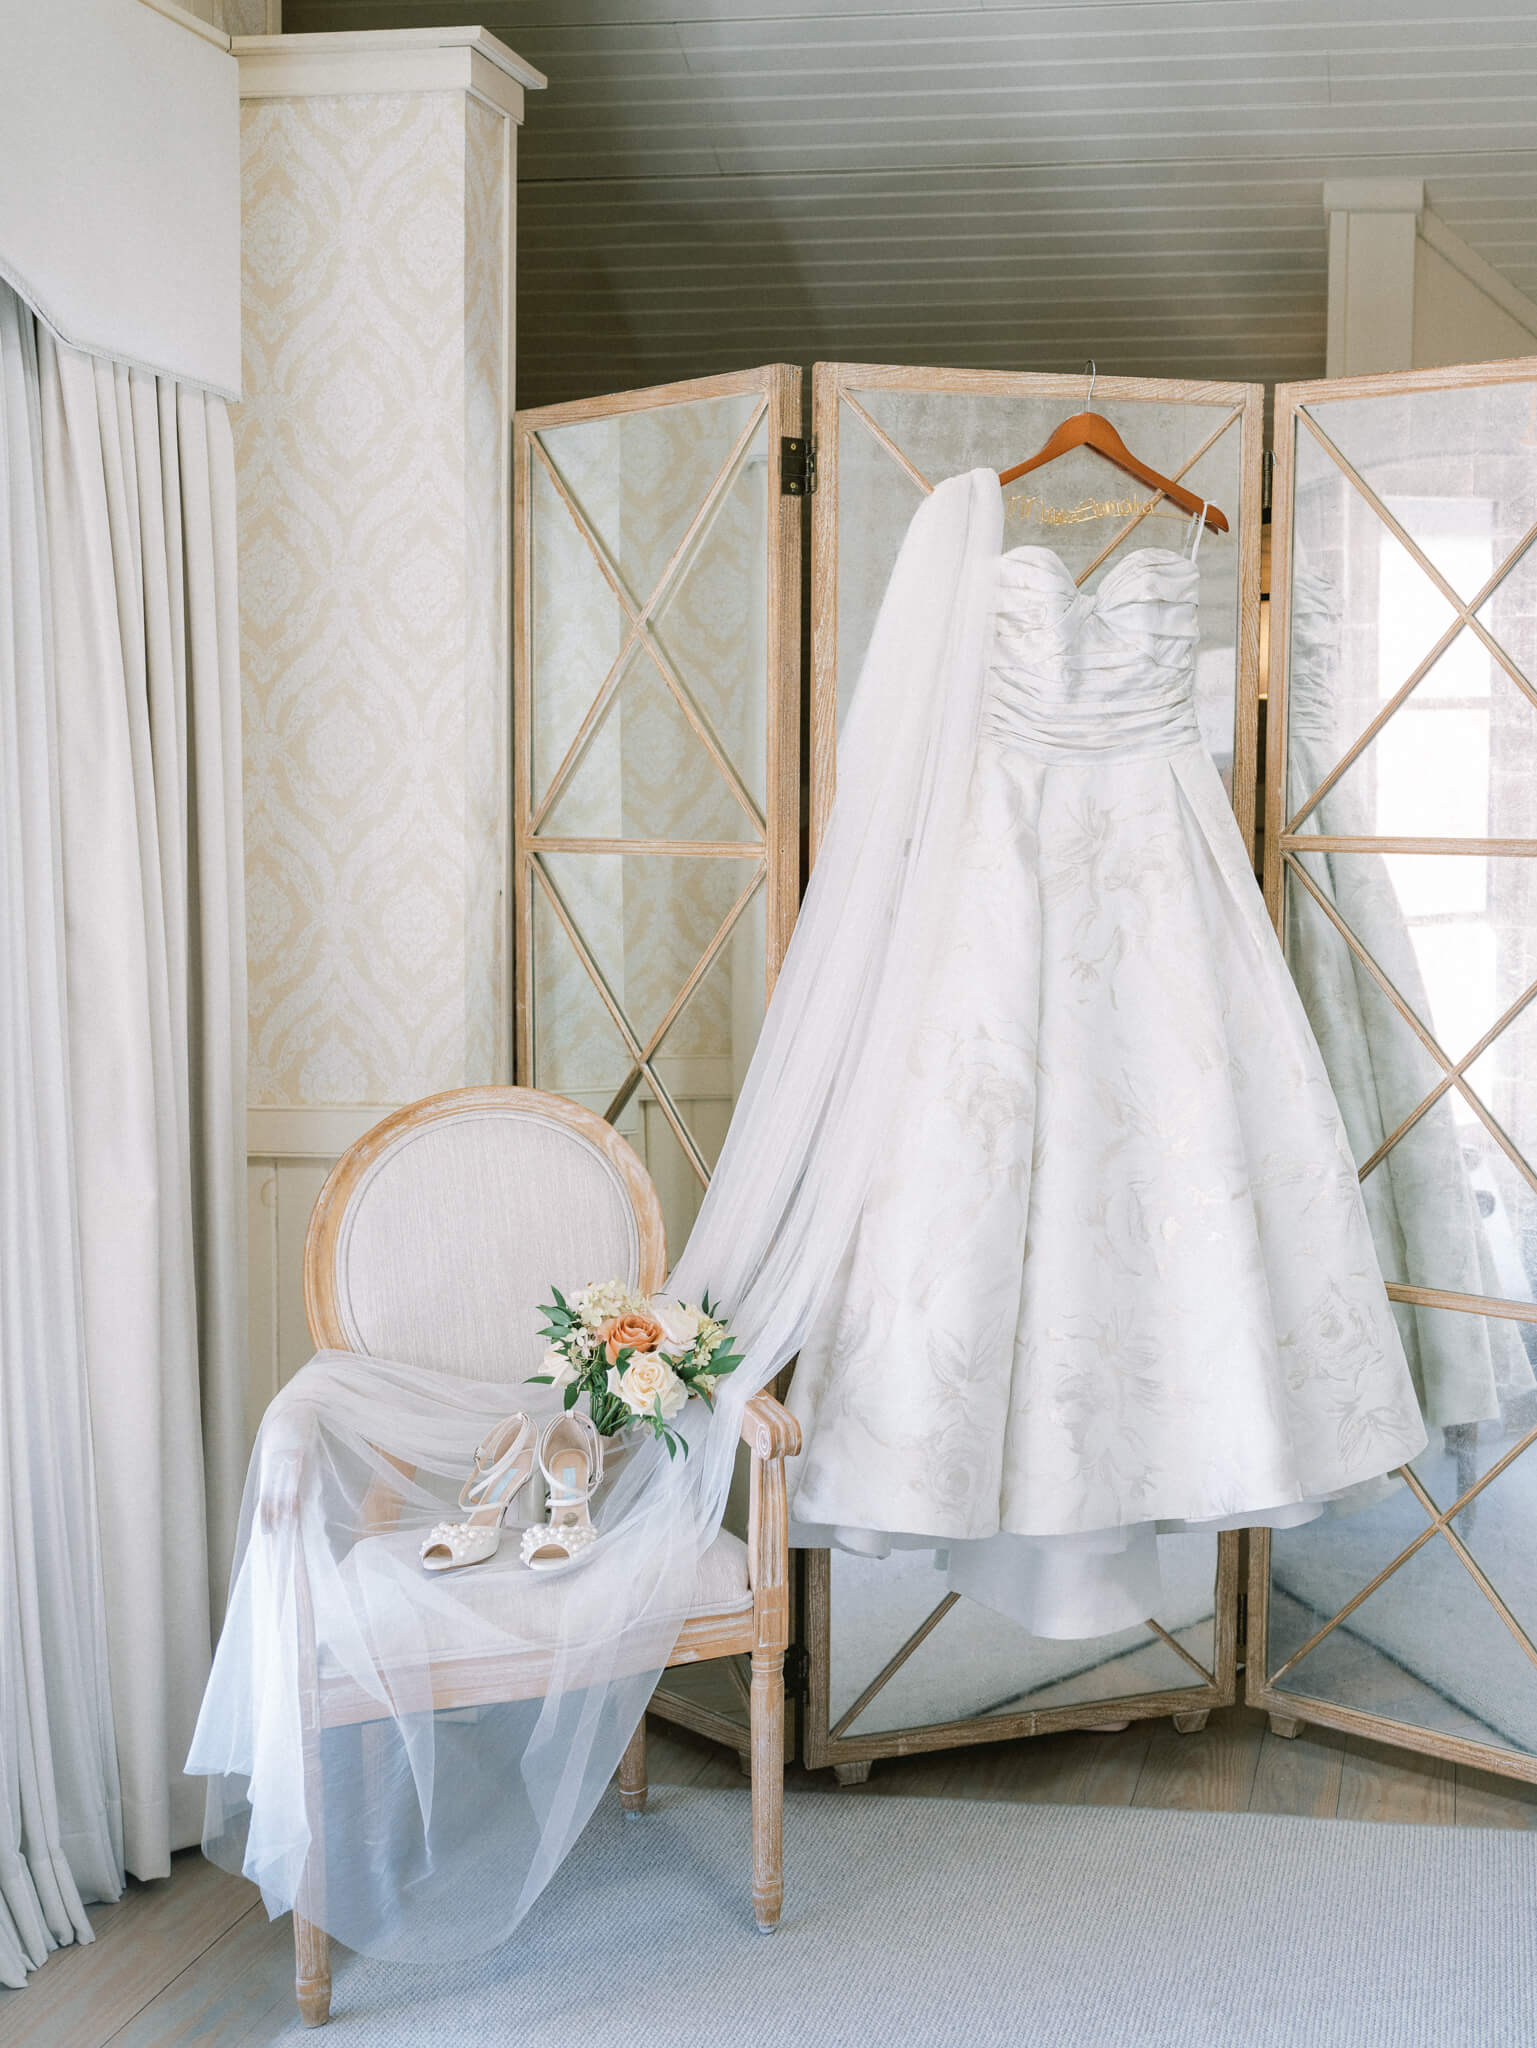 A floral wedding gown hanging from a mirrored divider next to a chair with the bride's veil, bouquet and shoes.